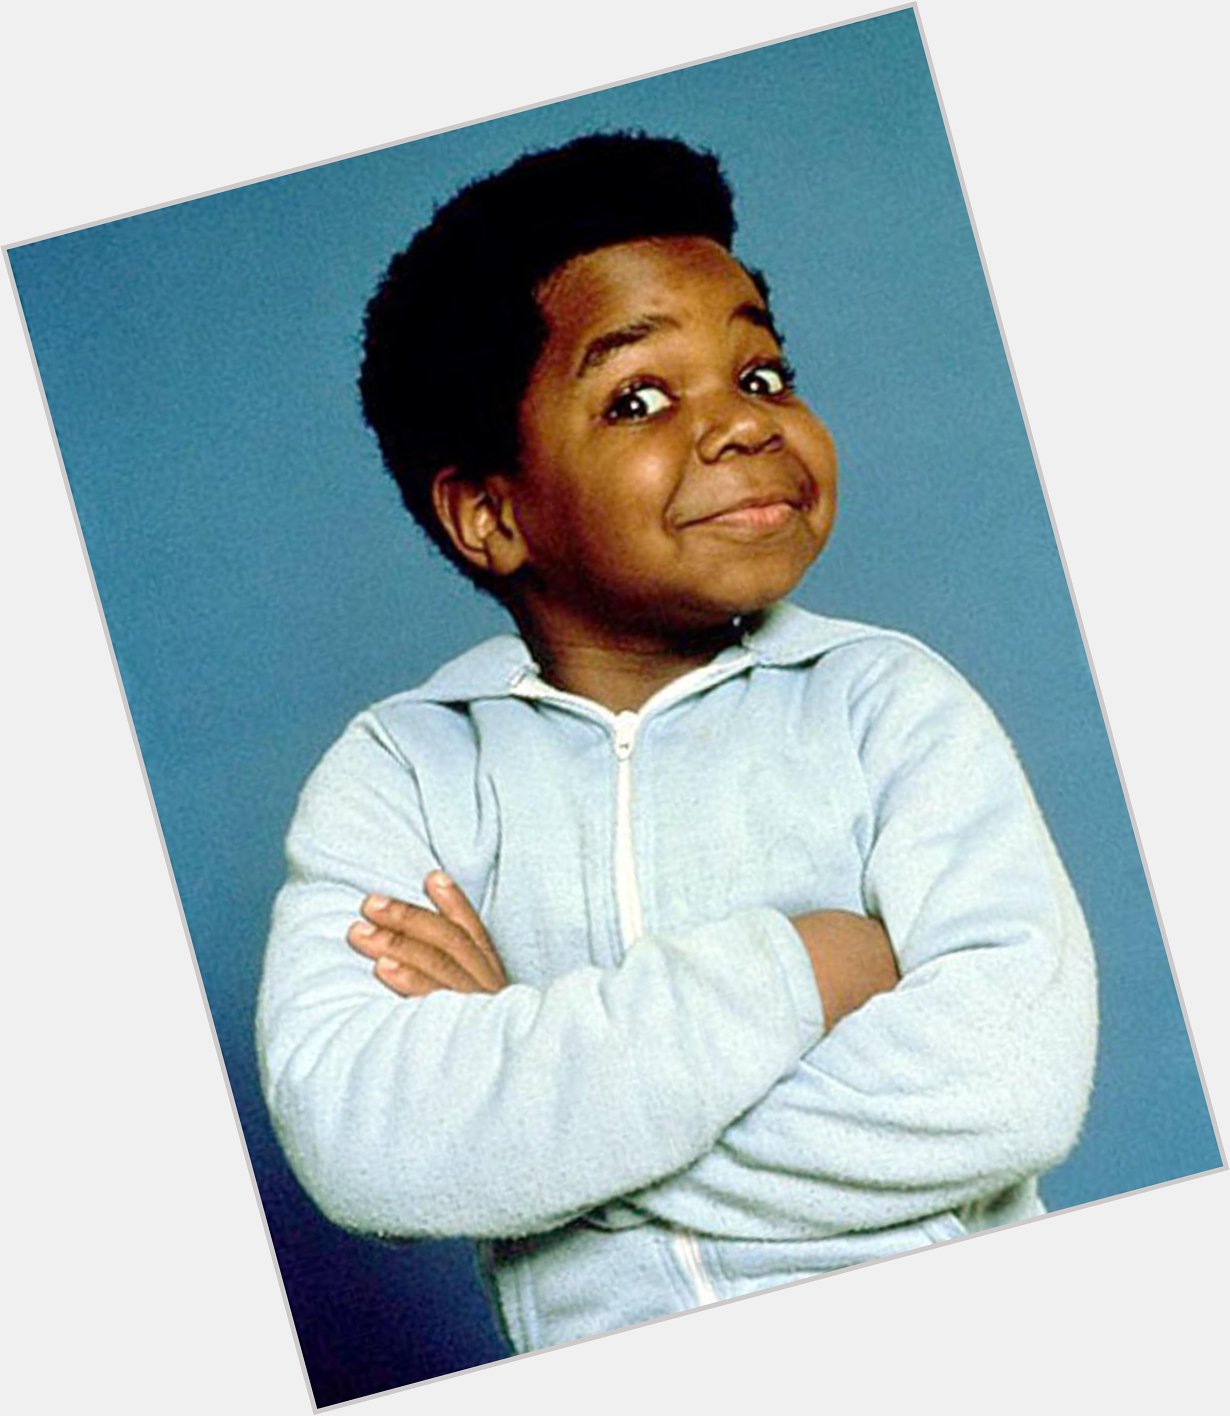 Happy Birthday to Gary Coleman, who would have turned 49 today! 